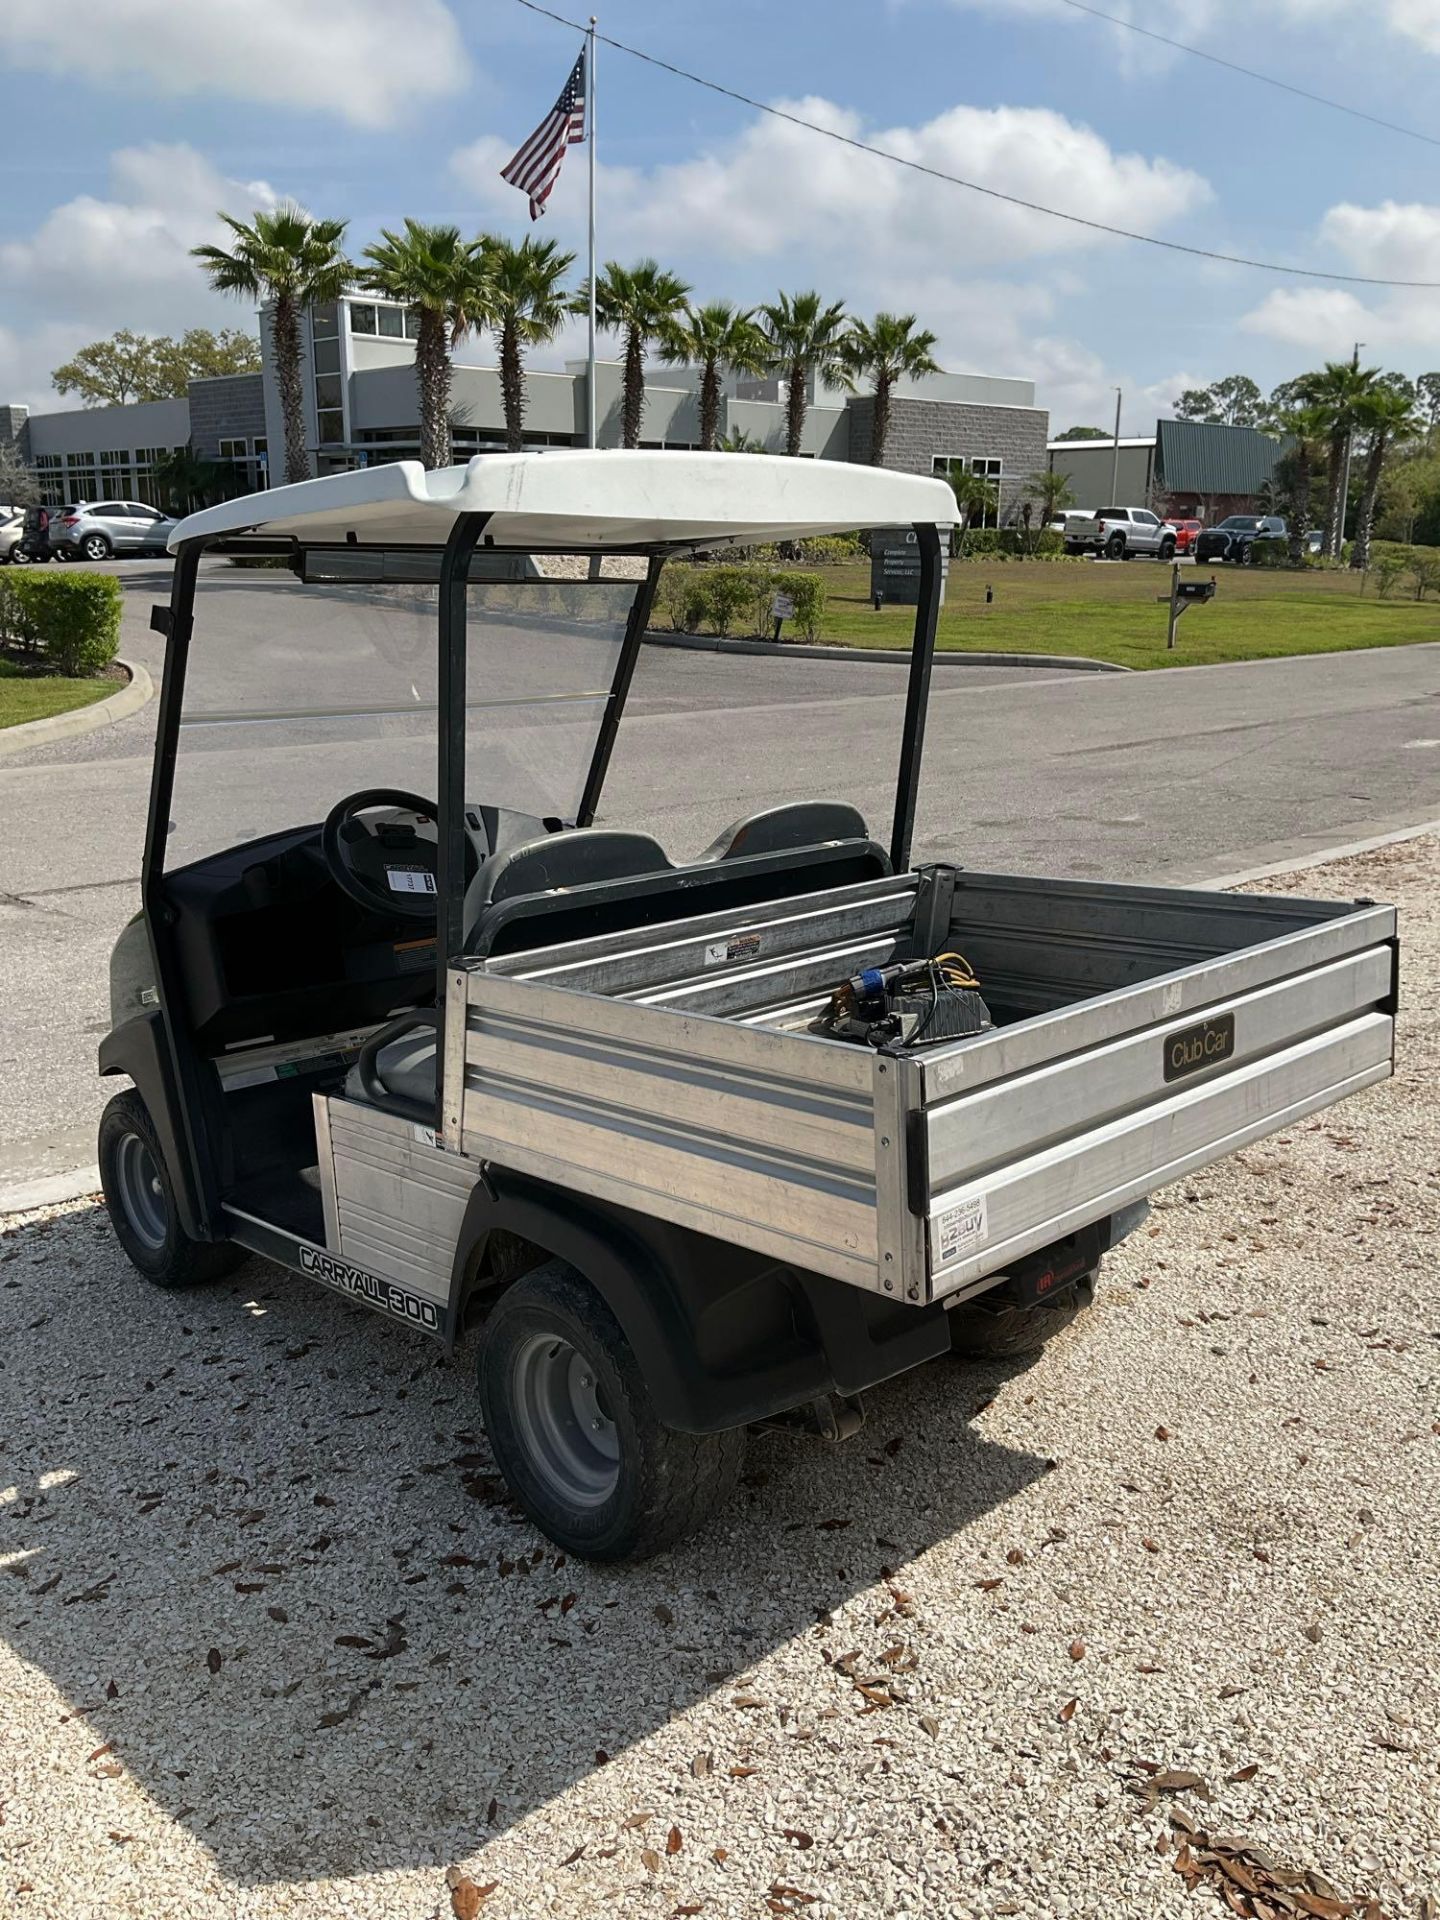 2018 CLUB CAR CARRYALL 300 ATV MODEL CA300 , ELECTRIC , MANUEL DUMP BED, BATTERY CHARGER INCLUDED... - Image 5 of 13